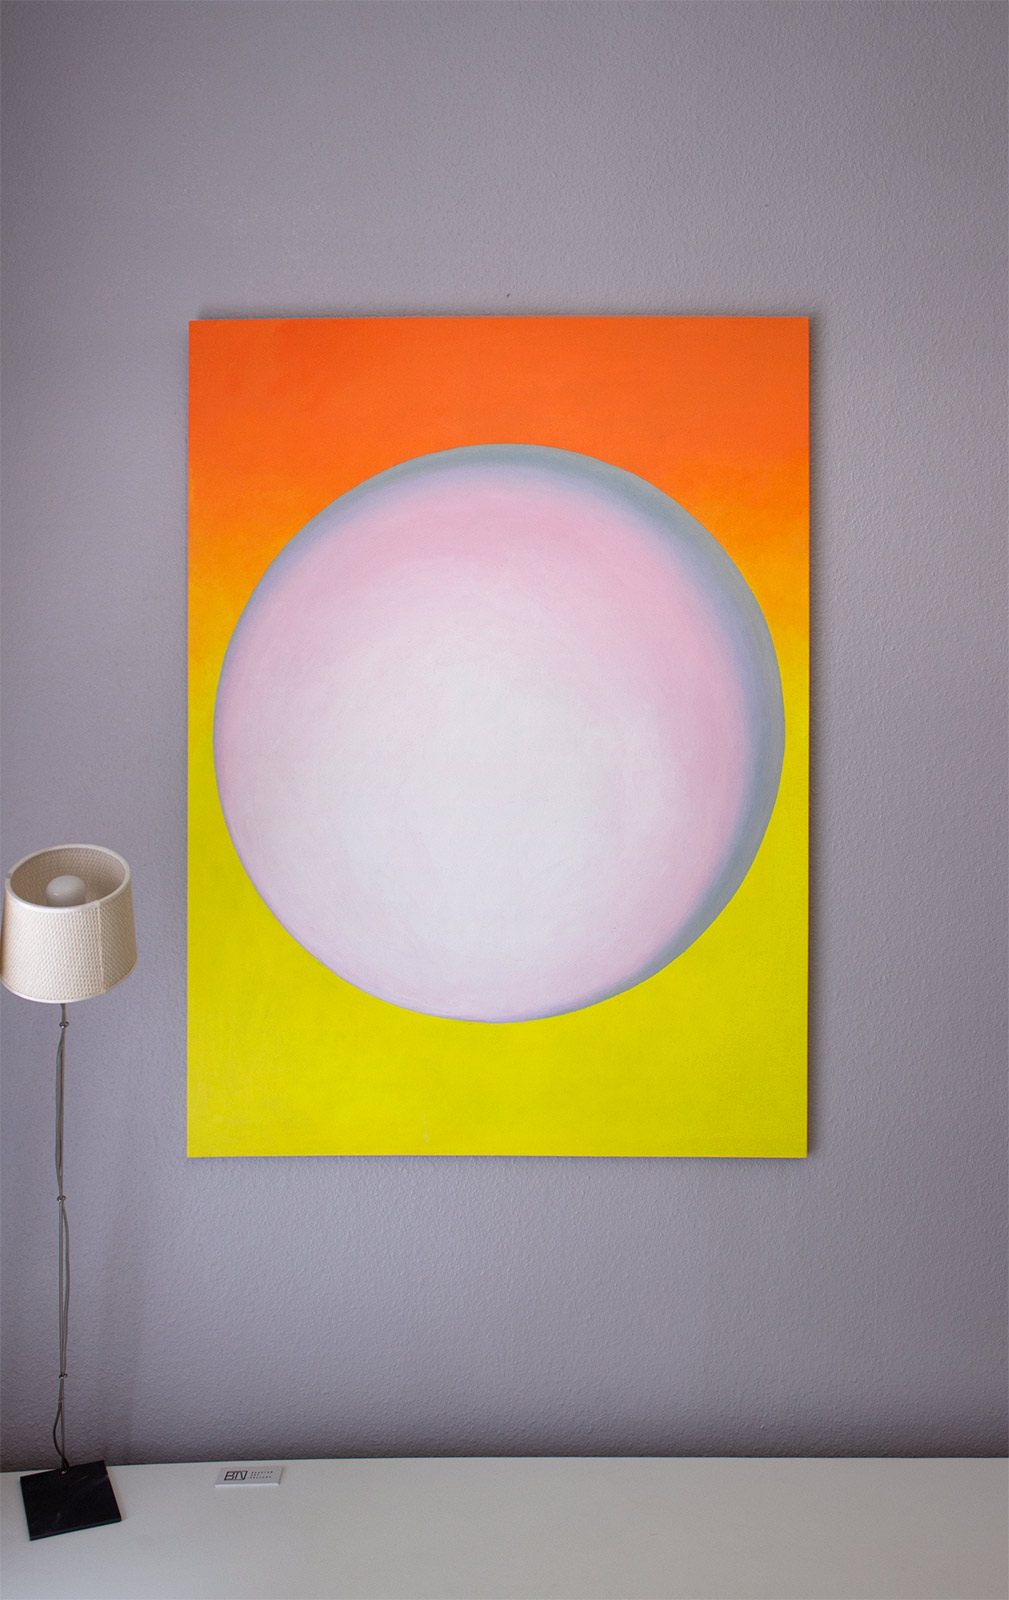 paintings, abstract, aesthetic, colorful, geometric, graphical, minimalistic, pop, architecture, technology, grey, orange, pink, white, yellow, acrylic, cotton-canvas, abstract-forms, beautiful, conceptual, contemporary-art, danish, design, interior, interior-design, modern, modern-art, nordic, pop-art, scandinavien, Buy original high quality art. Paintings, drawings, limited edition prints & posters by talented artists.